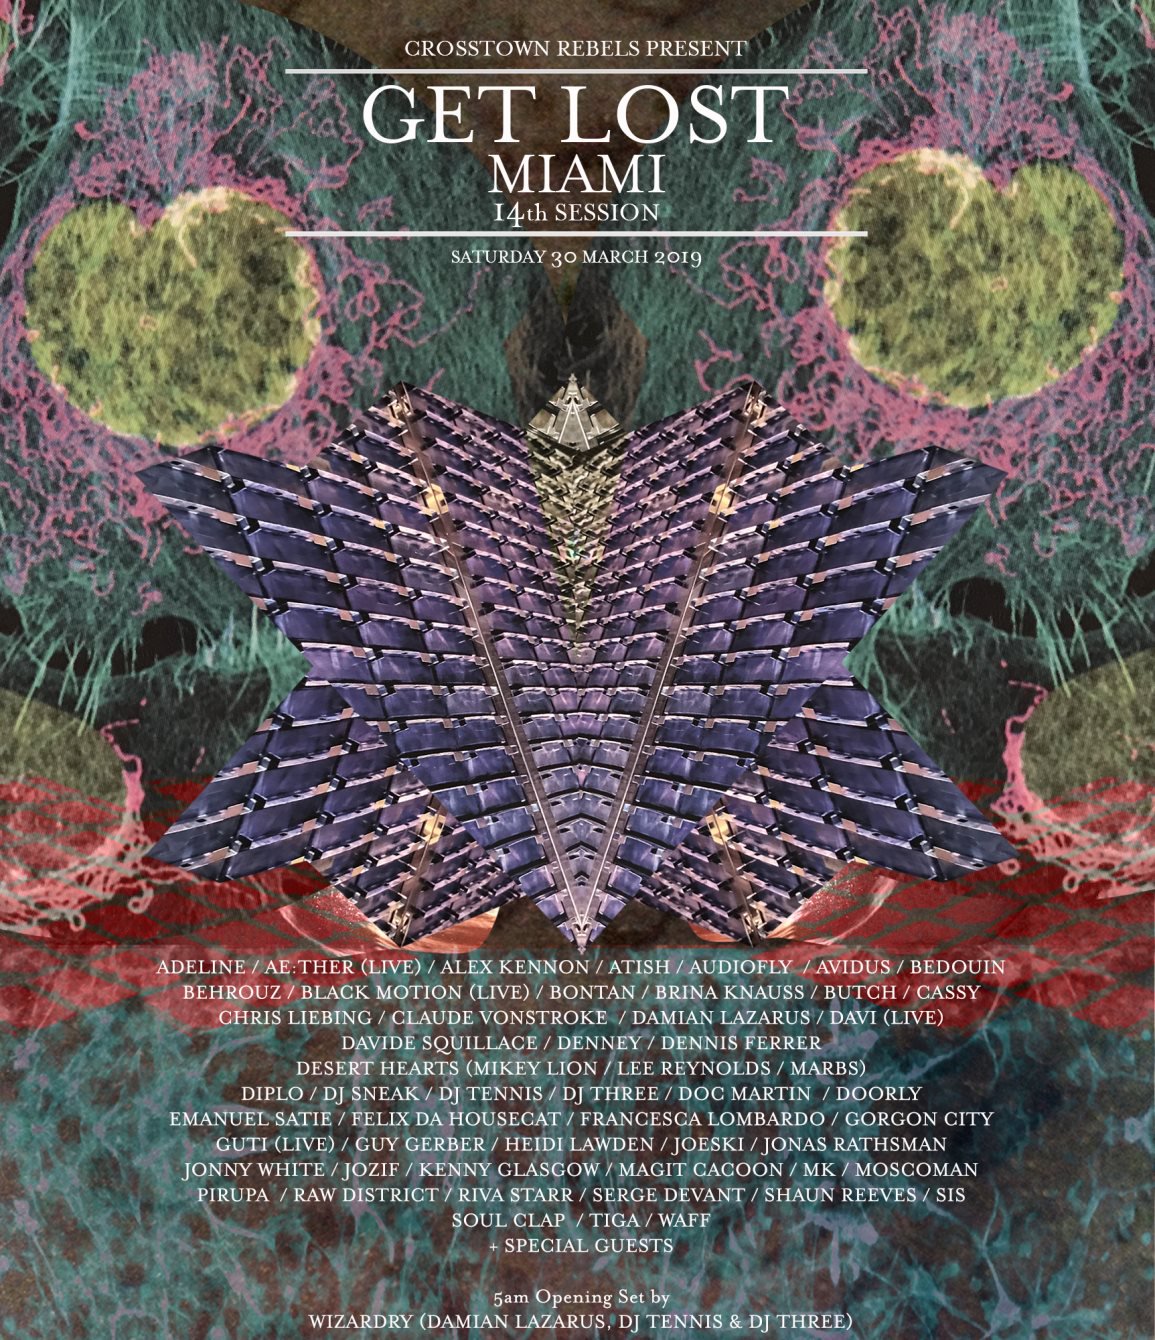 Get Lost Miami 2019 Lineup